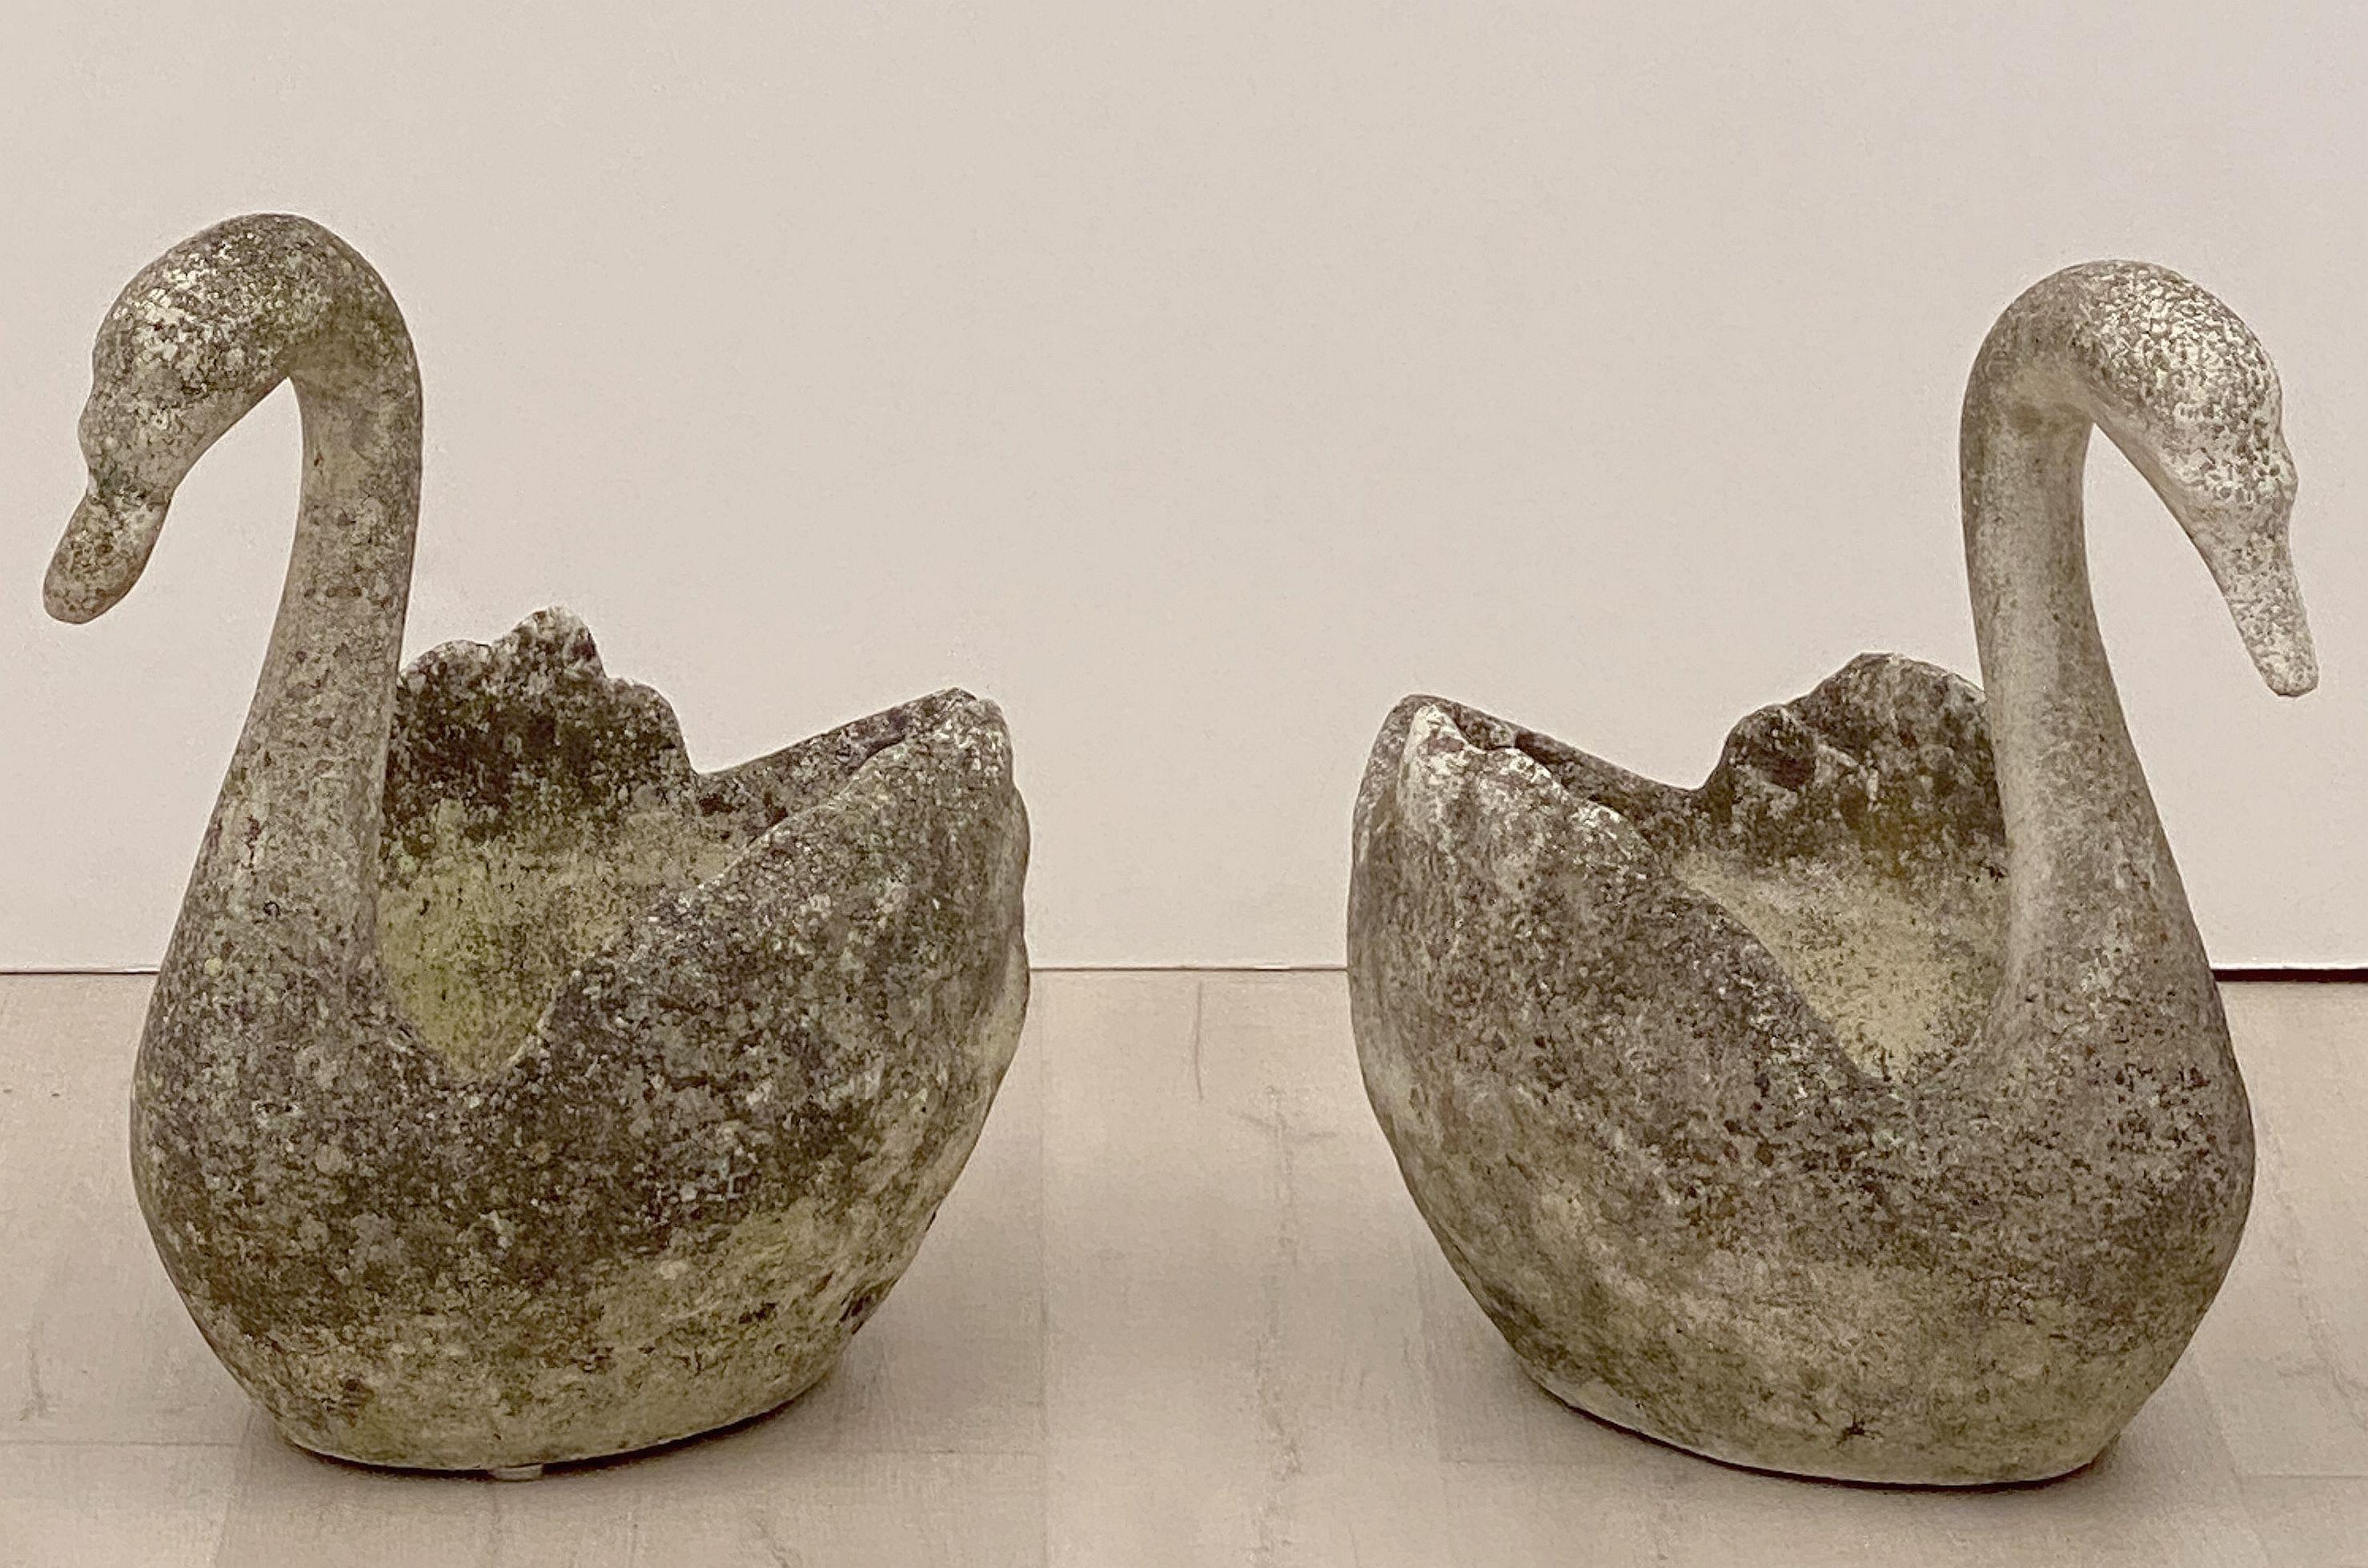 A fine pair of large English garden planters in the shape of swans, each featuring an elegant silhouette design of cast stone.

Two available - Individually Priced - $3495 each swan planter